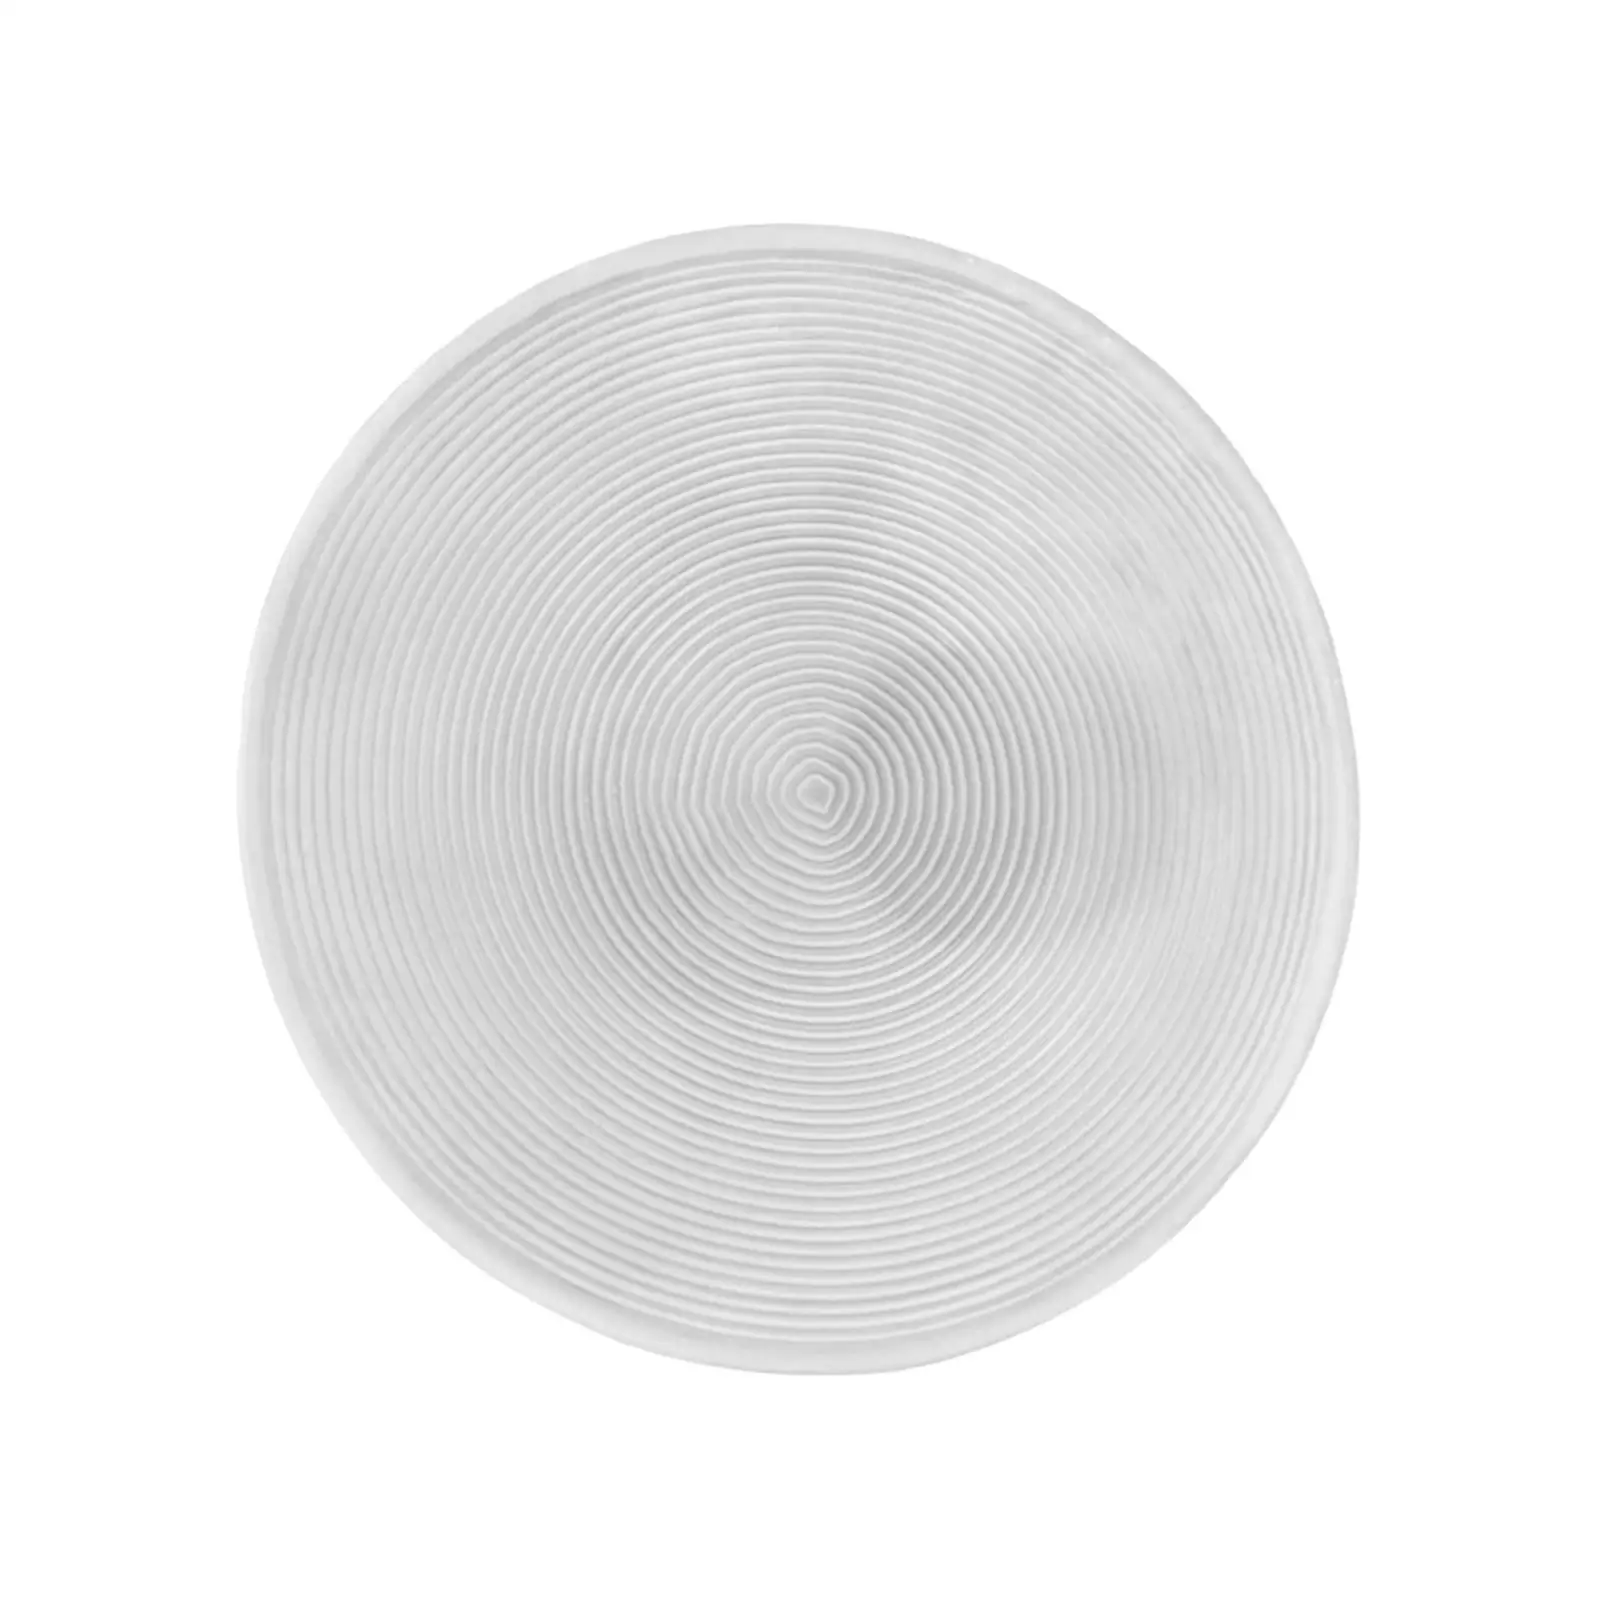 Round Wall Lamp Glass Lamp Shade Cover Wall Lights Fixtures Wall Sconces Lighting for Bathroom Decoration Kitchen Island Office